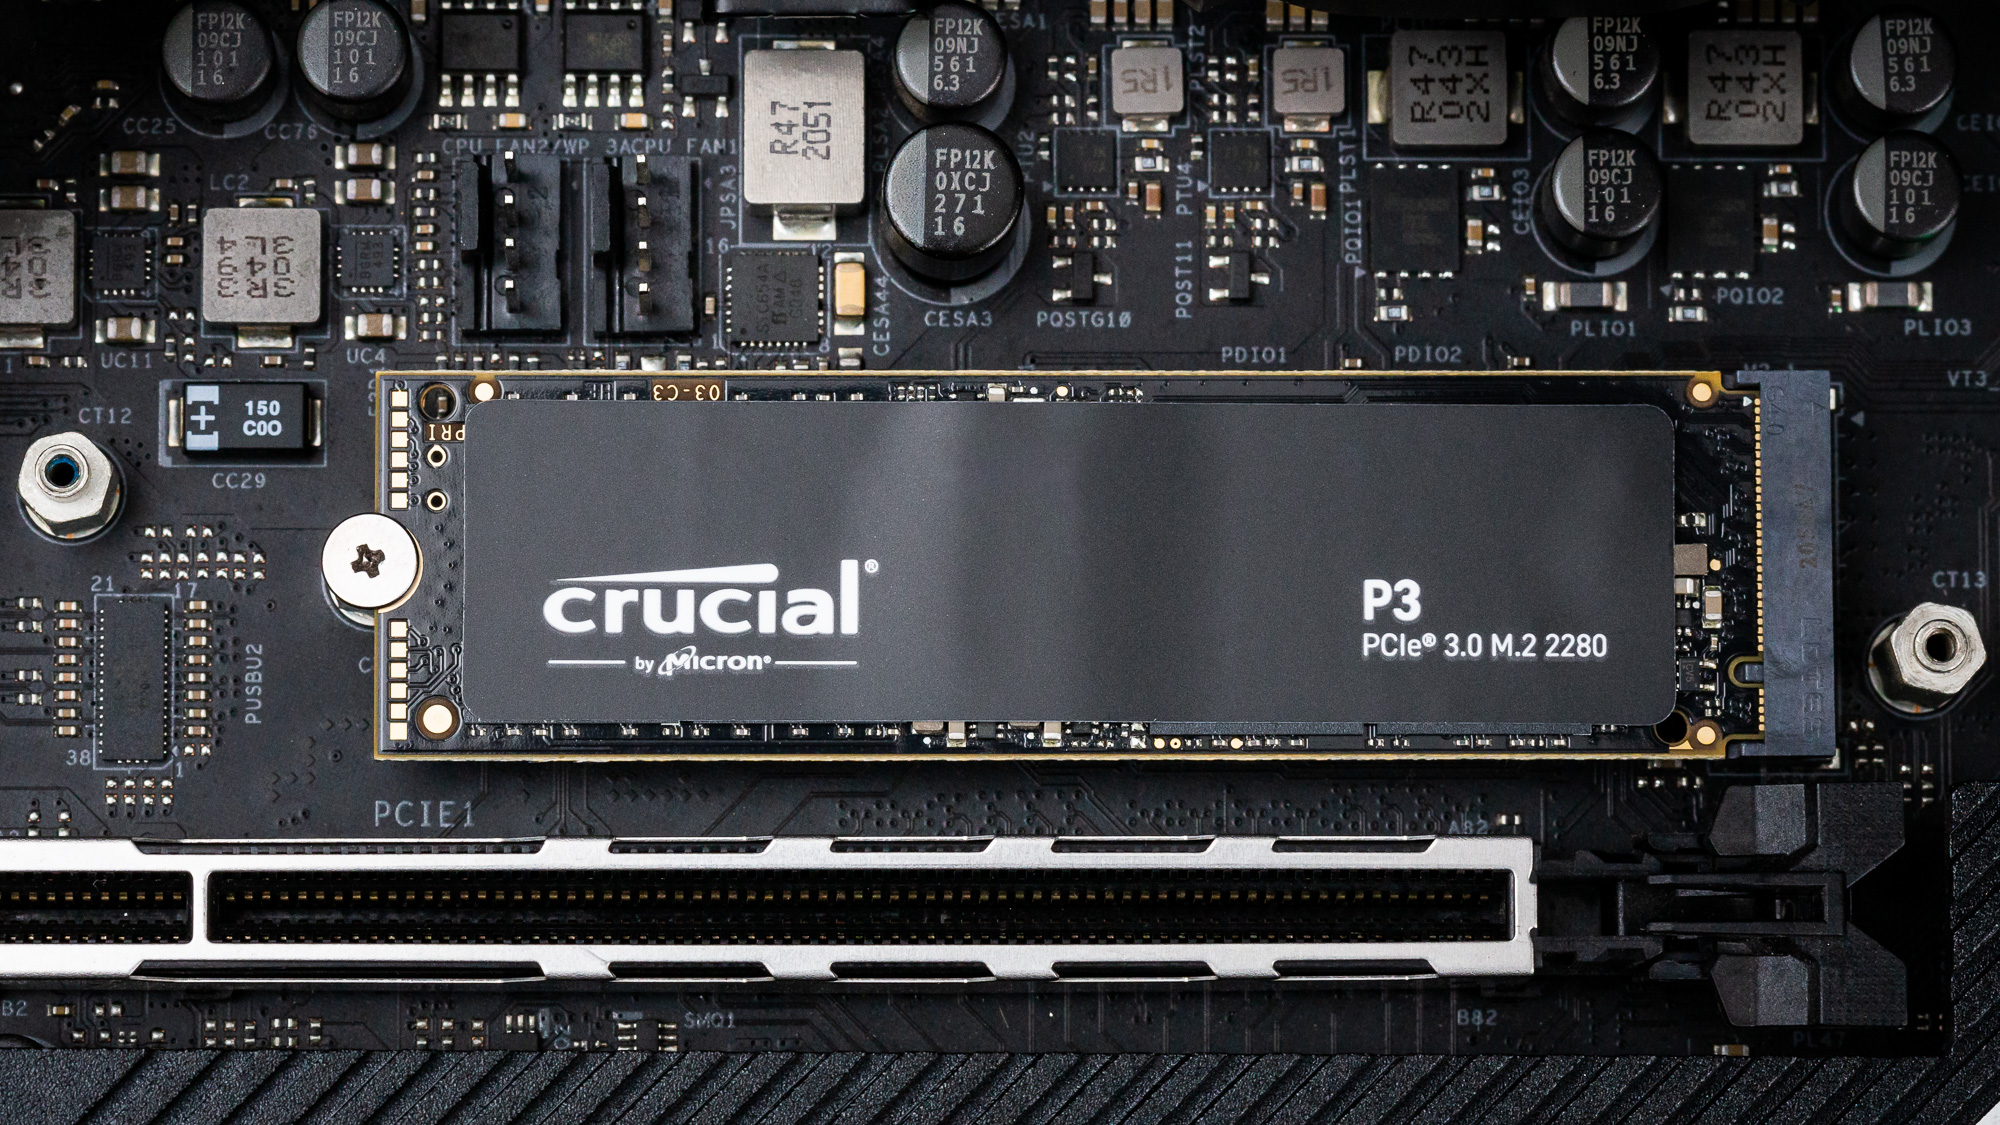 Crucial P3 SSD Review: Solid Secondary SSD | Tom's Hardware